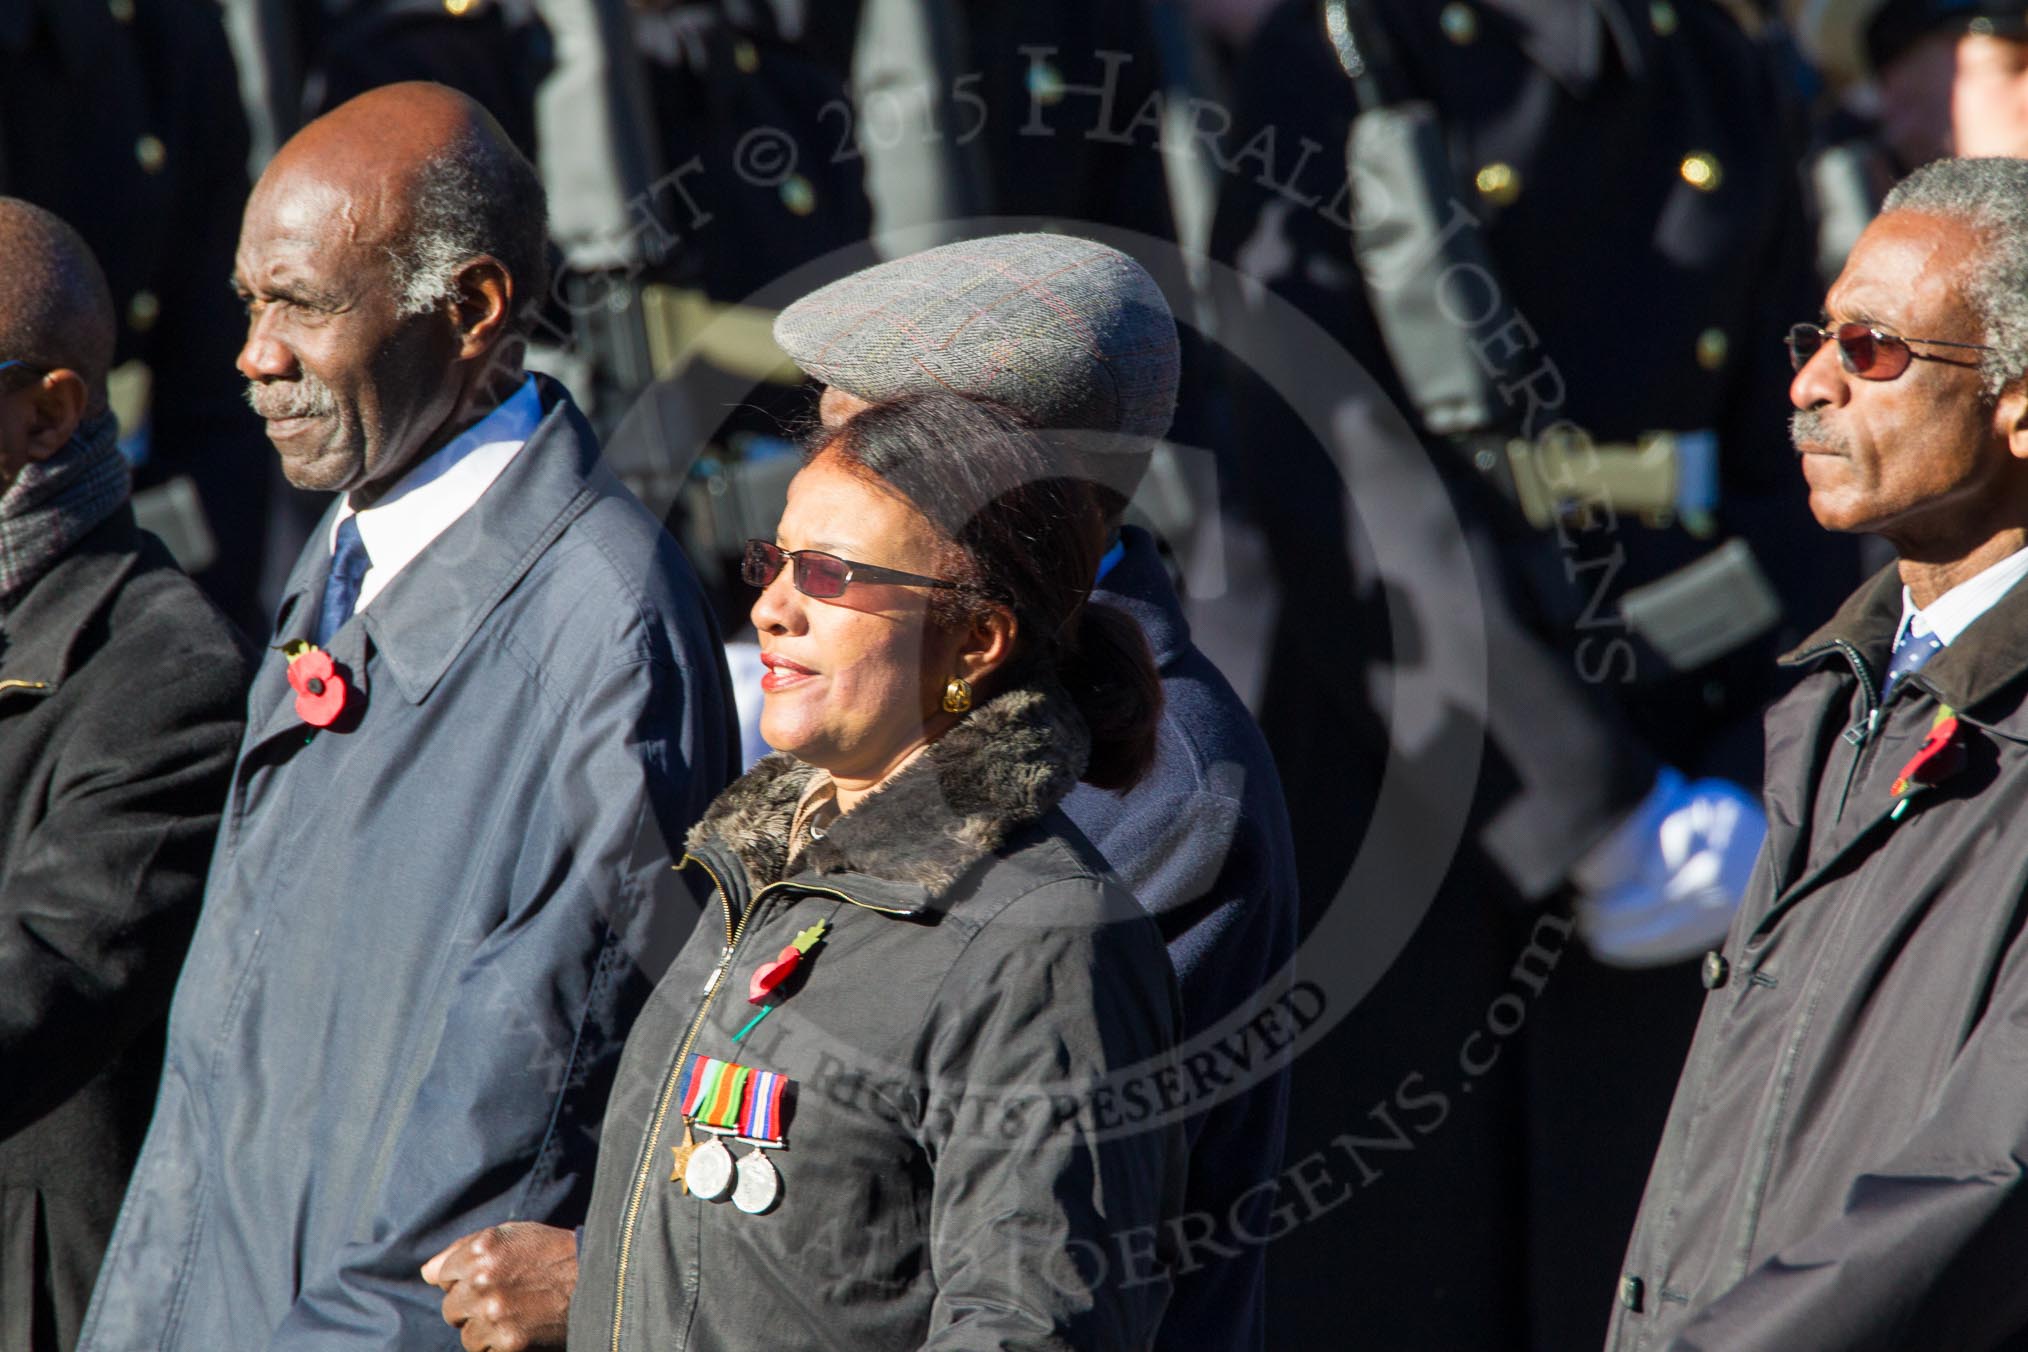 Remembrance Sunday Cenotaph March Past 2013: D3 - West Indian Association of Service Personnel..
Press stand opposite the Foreign Office building, Whitehall, London SW1,
London,
Greater London,
United Kingdom,
on 10 November 2013 at 11:39, image #49